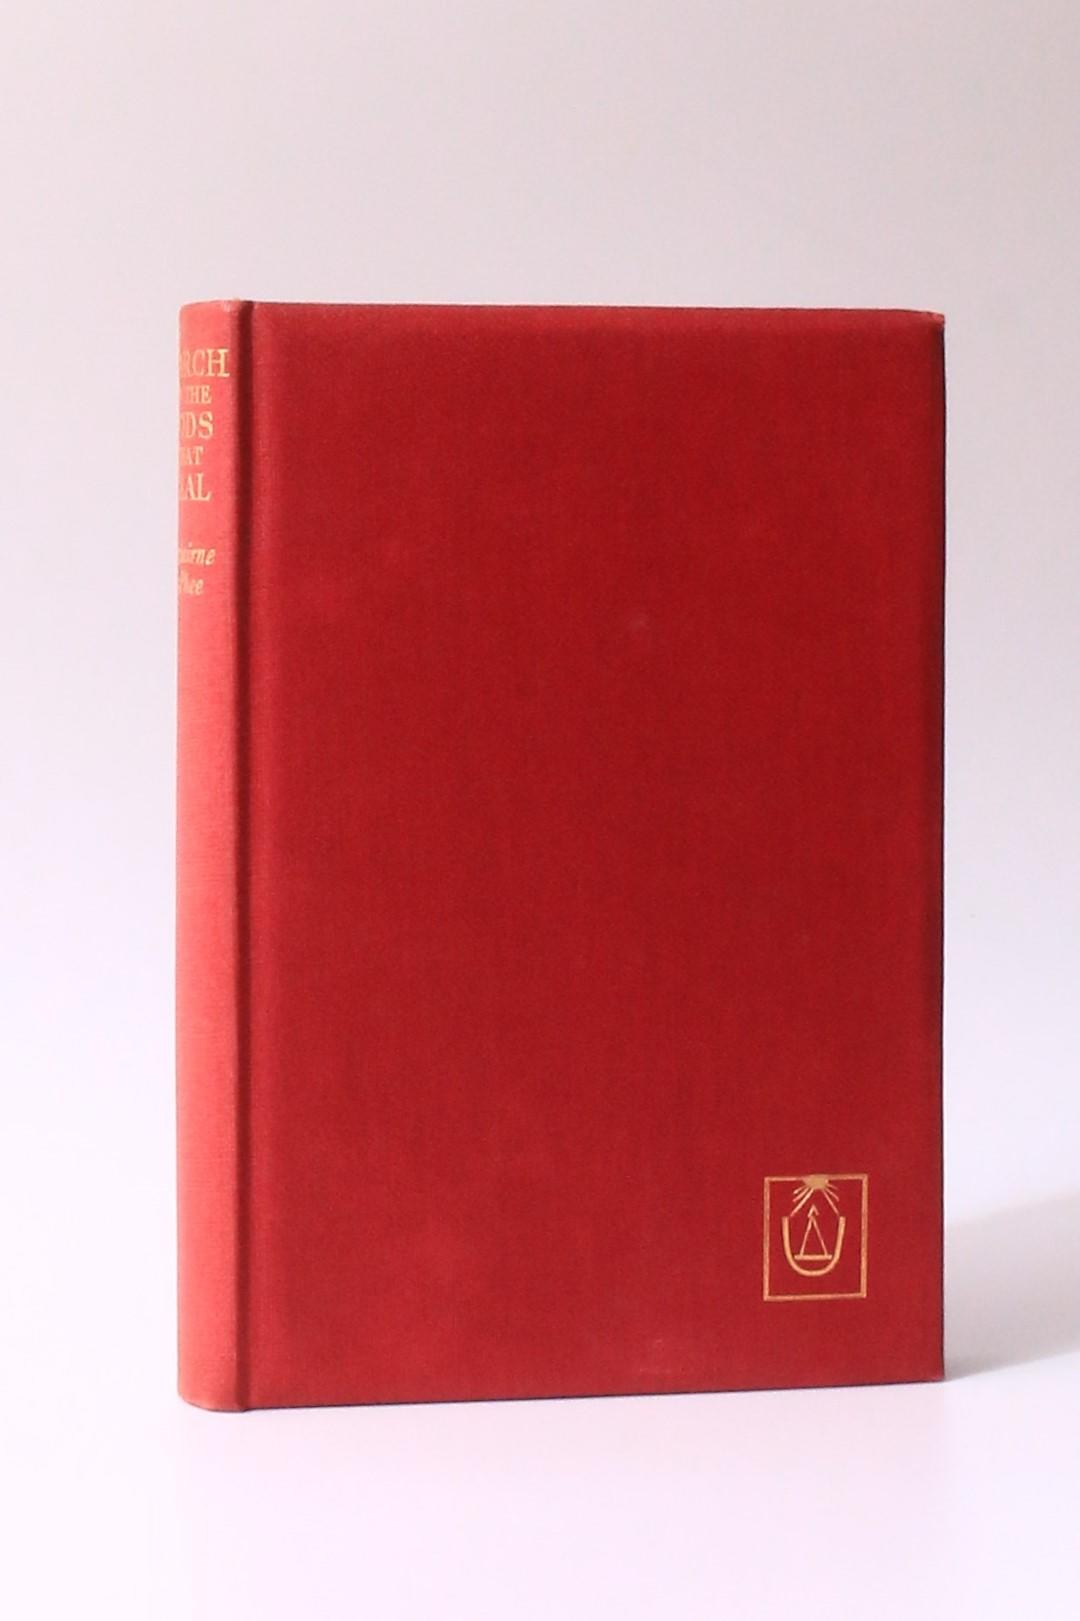 [S.R.] Fairbairne McPhee - March to the Gods that Heal and Other Stories - Boriswood, 1933, Signed First Edition.